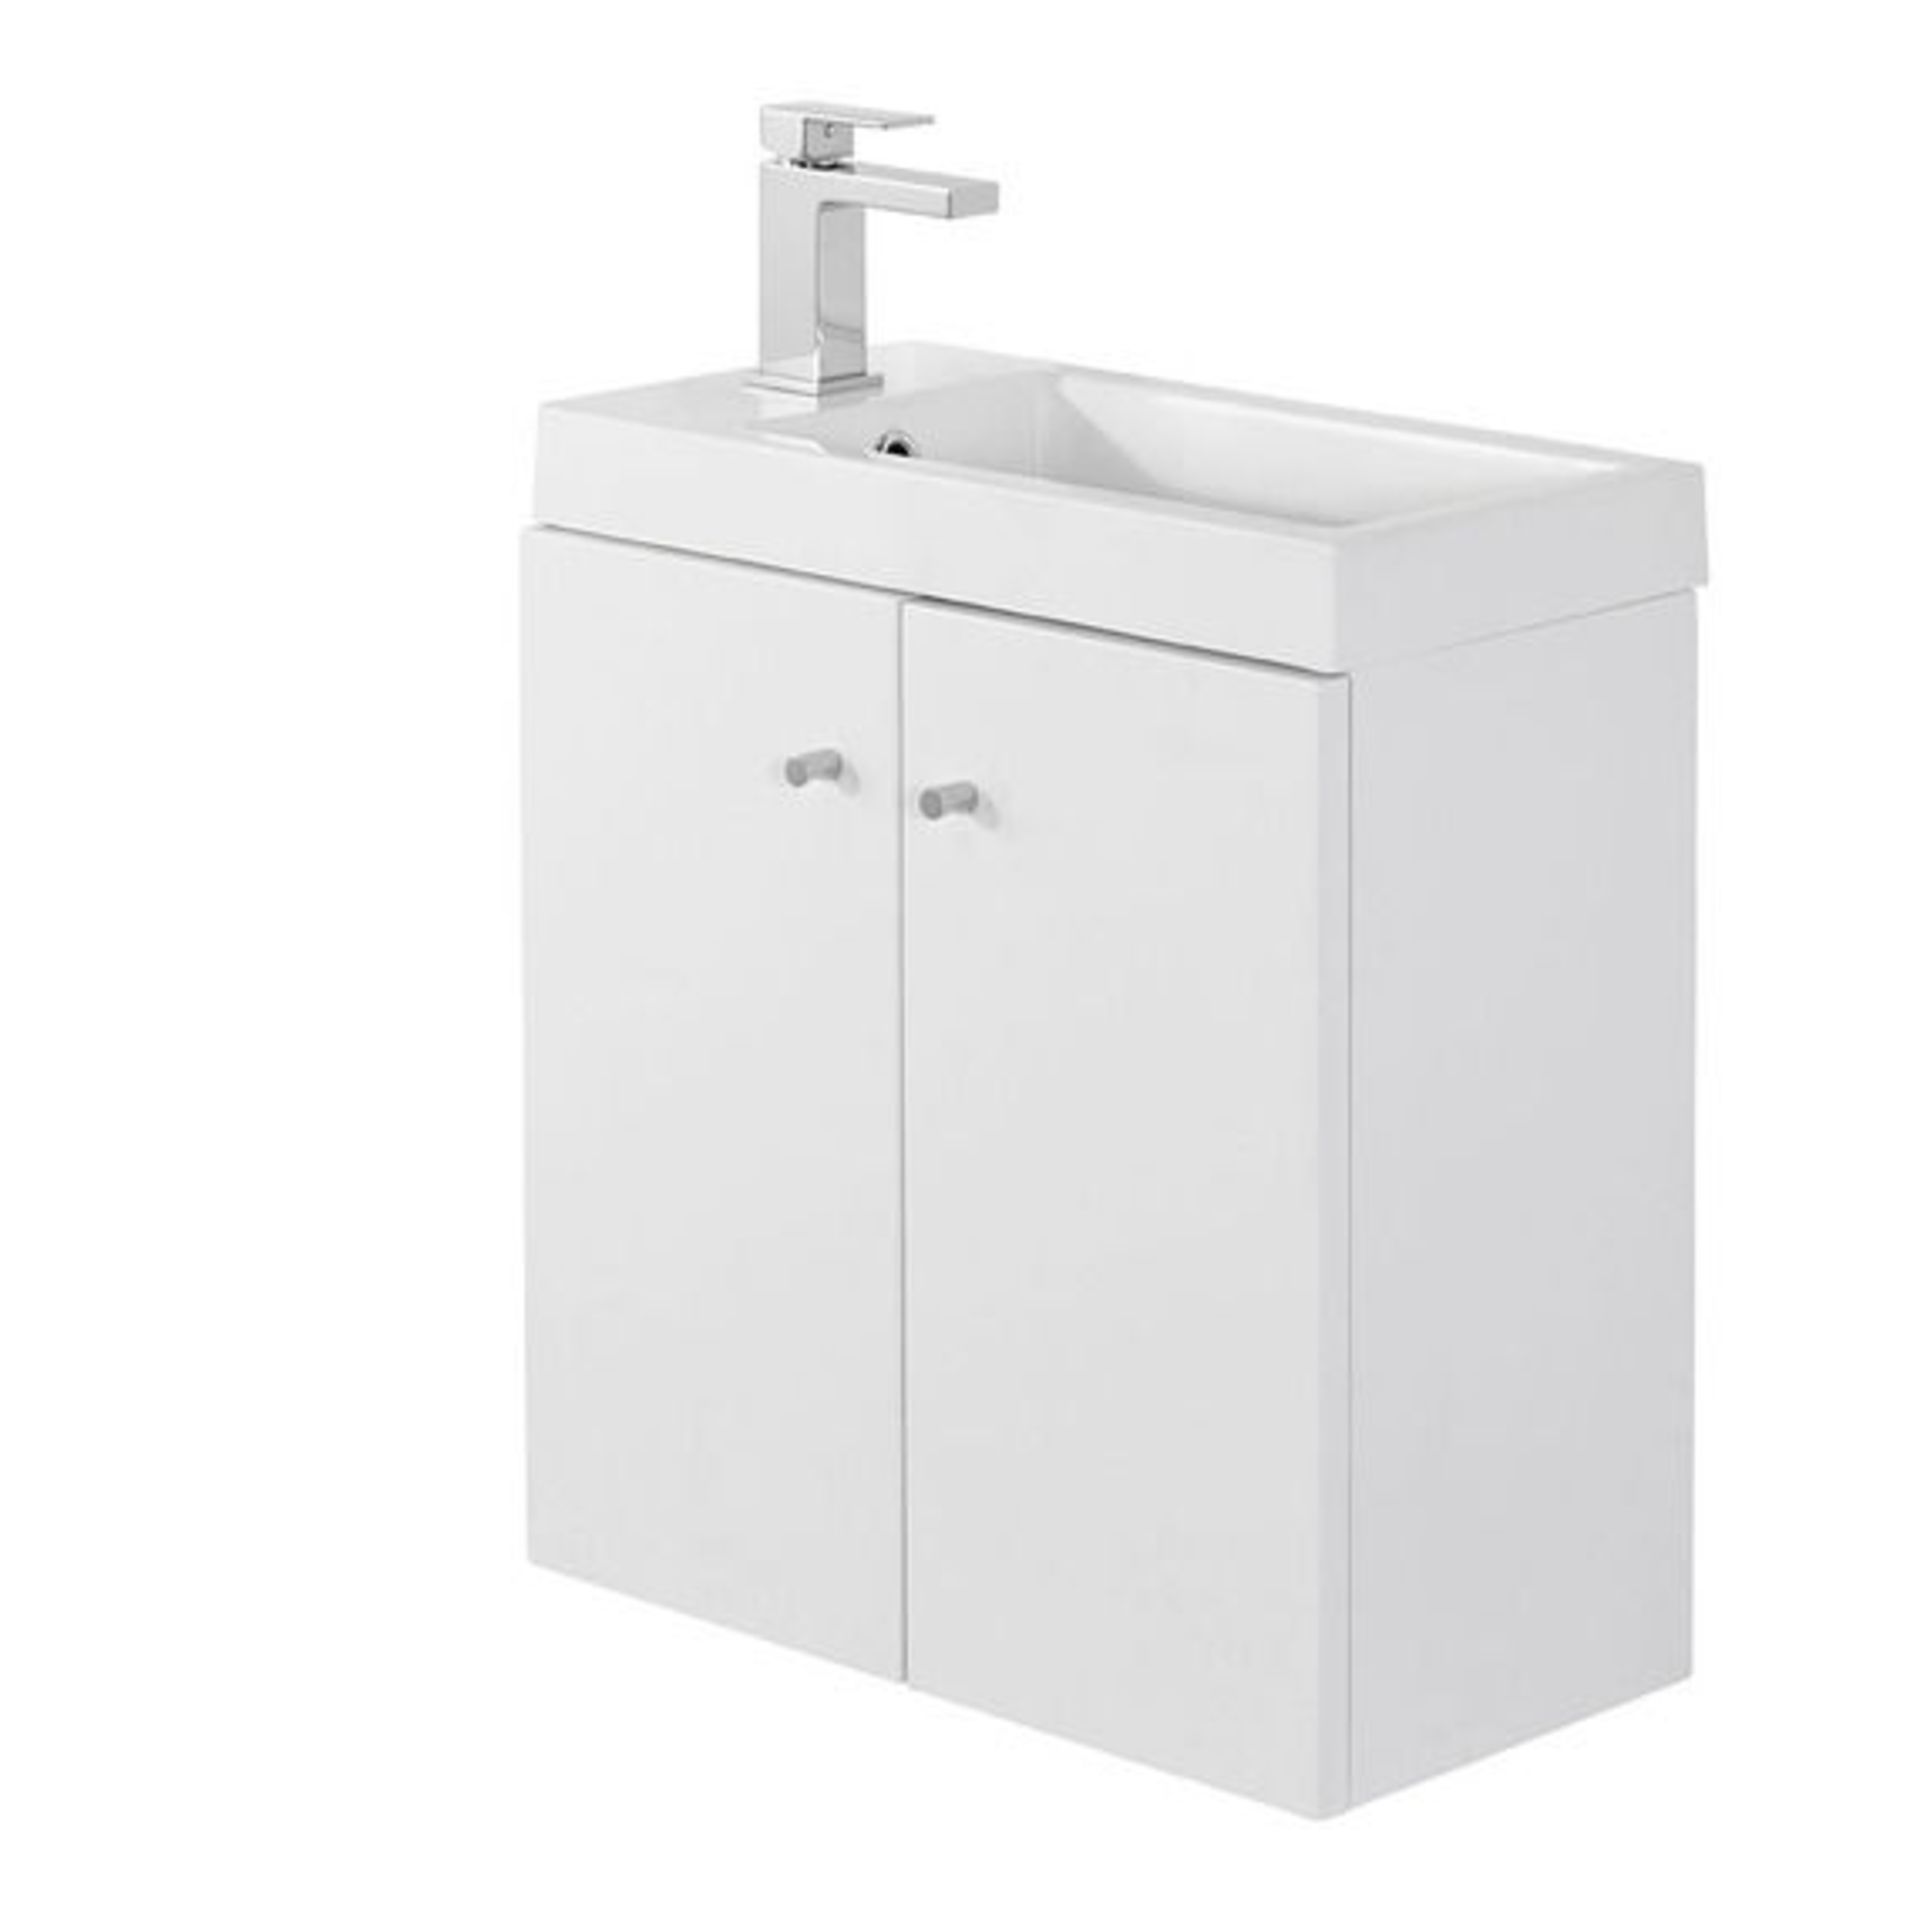 10 x Alpine Duo 495 Wall Hung Vanity Unit  - Gloss White - Brand New Boxed Stock - Dimensions: W49.5 - Image 5 of 5